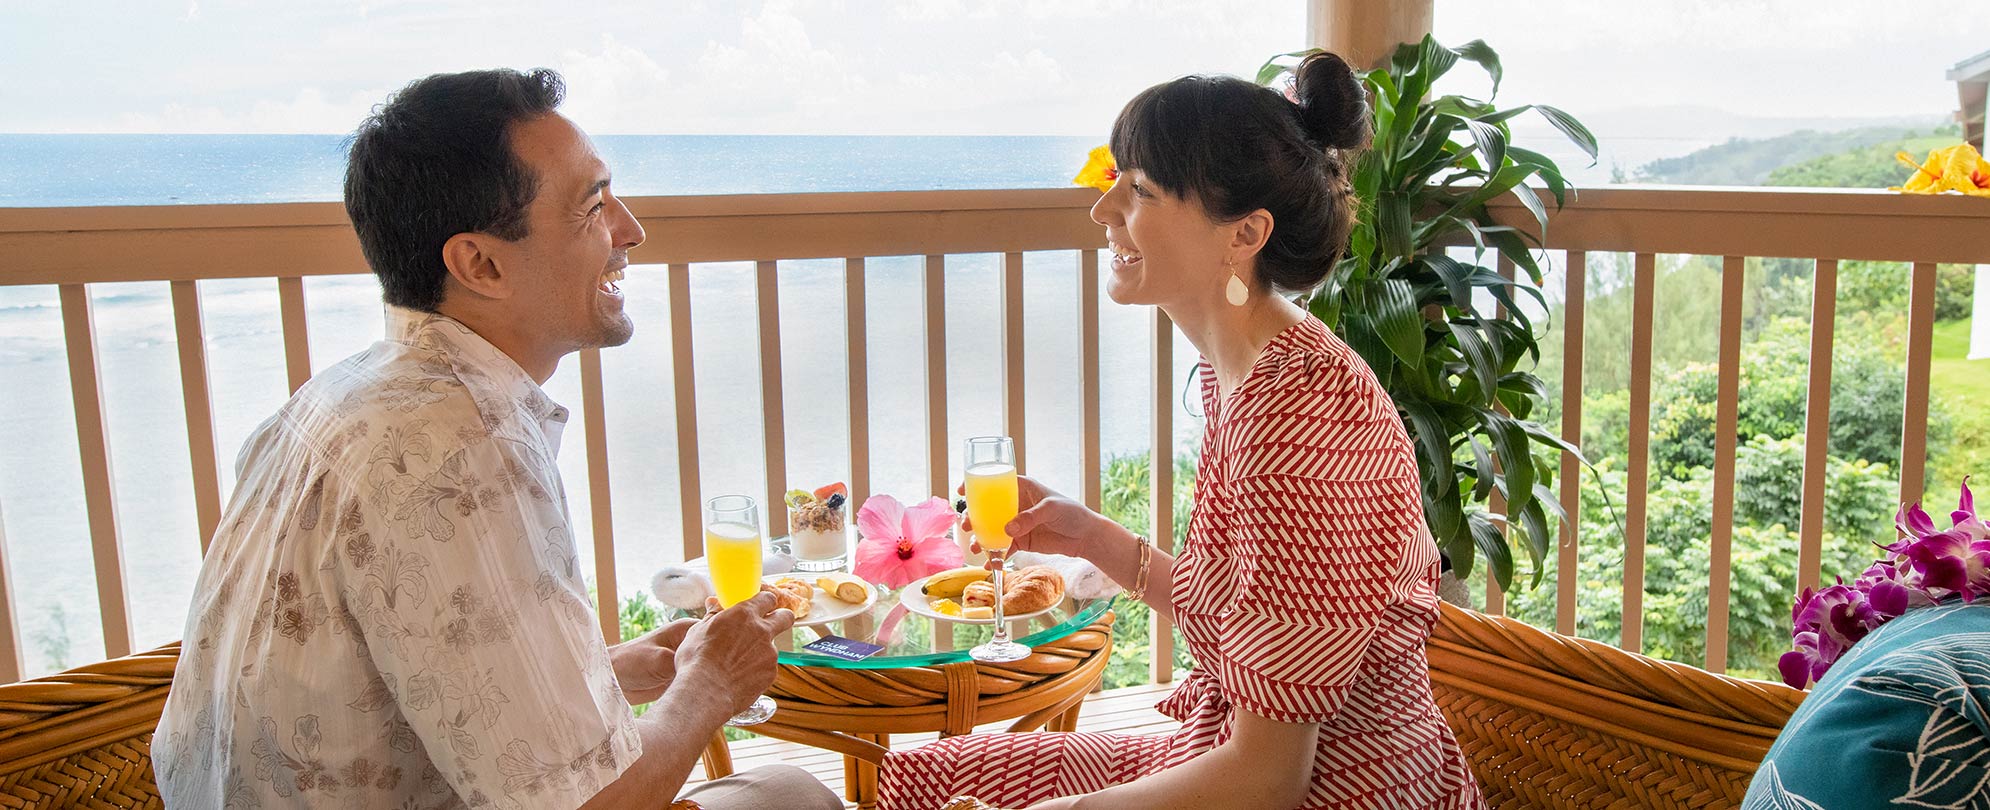 A couple enjoys mimosas and pastries on their resort lanai, the ocean visible in the distance.